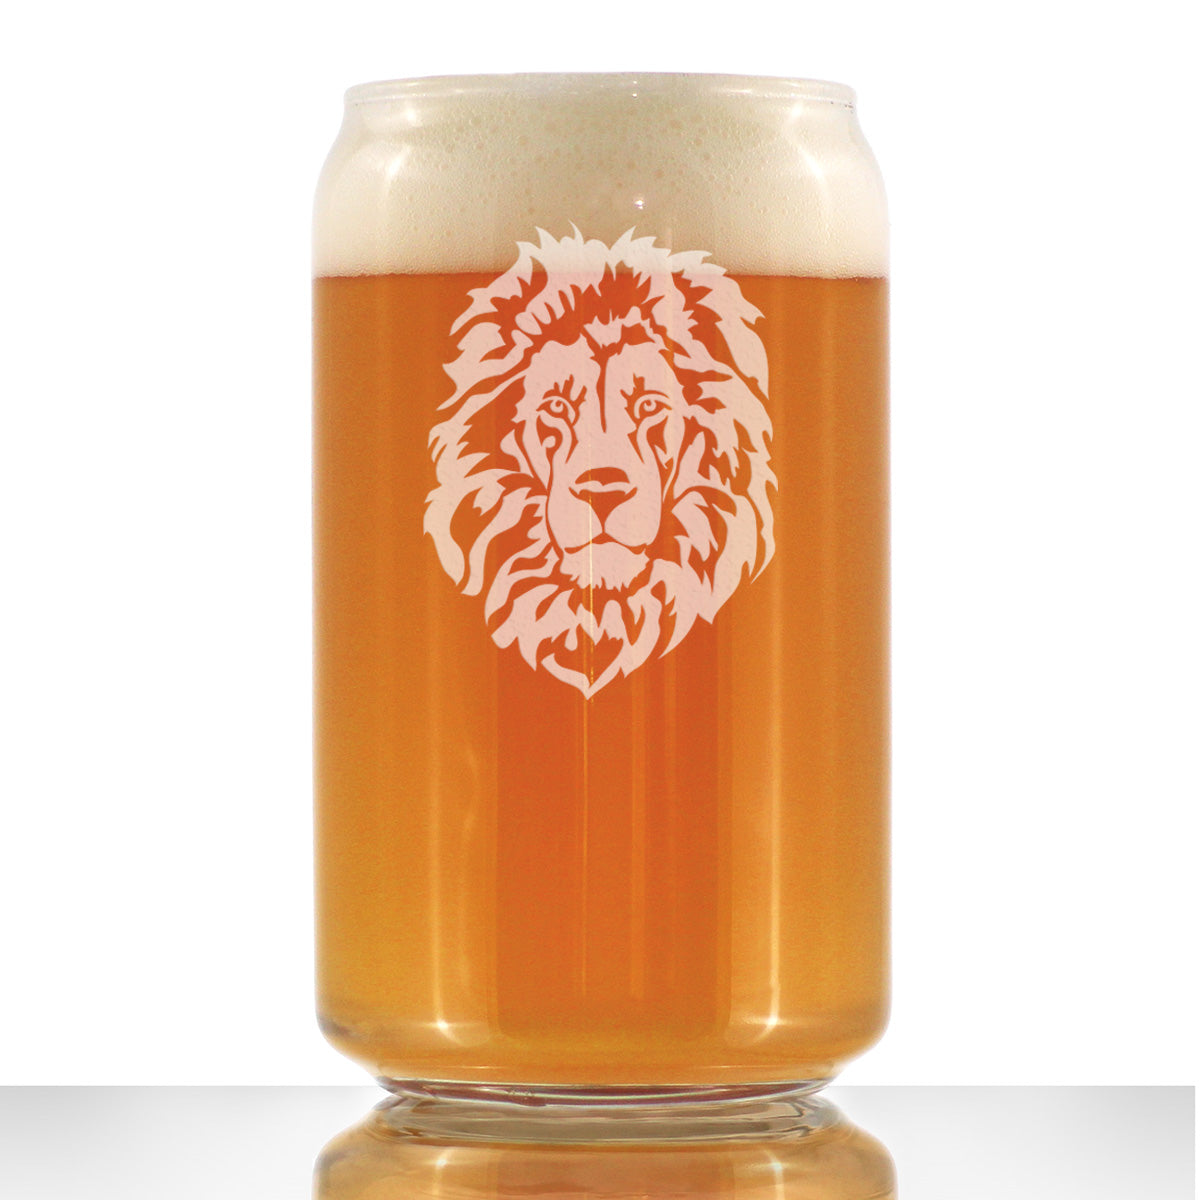 Lion Face Beer Can Pint Glass - Unique Lion Themed Decor and Gifts for Animal Lovers - 16 Oz Glasses